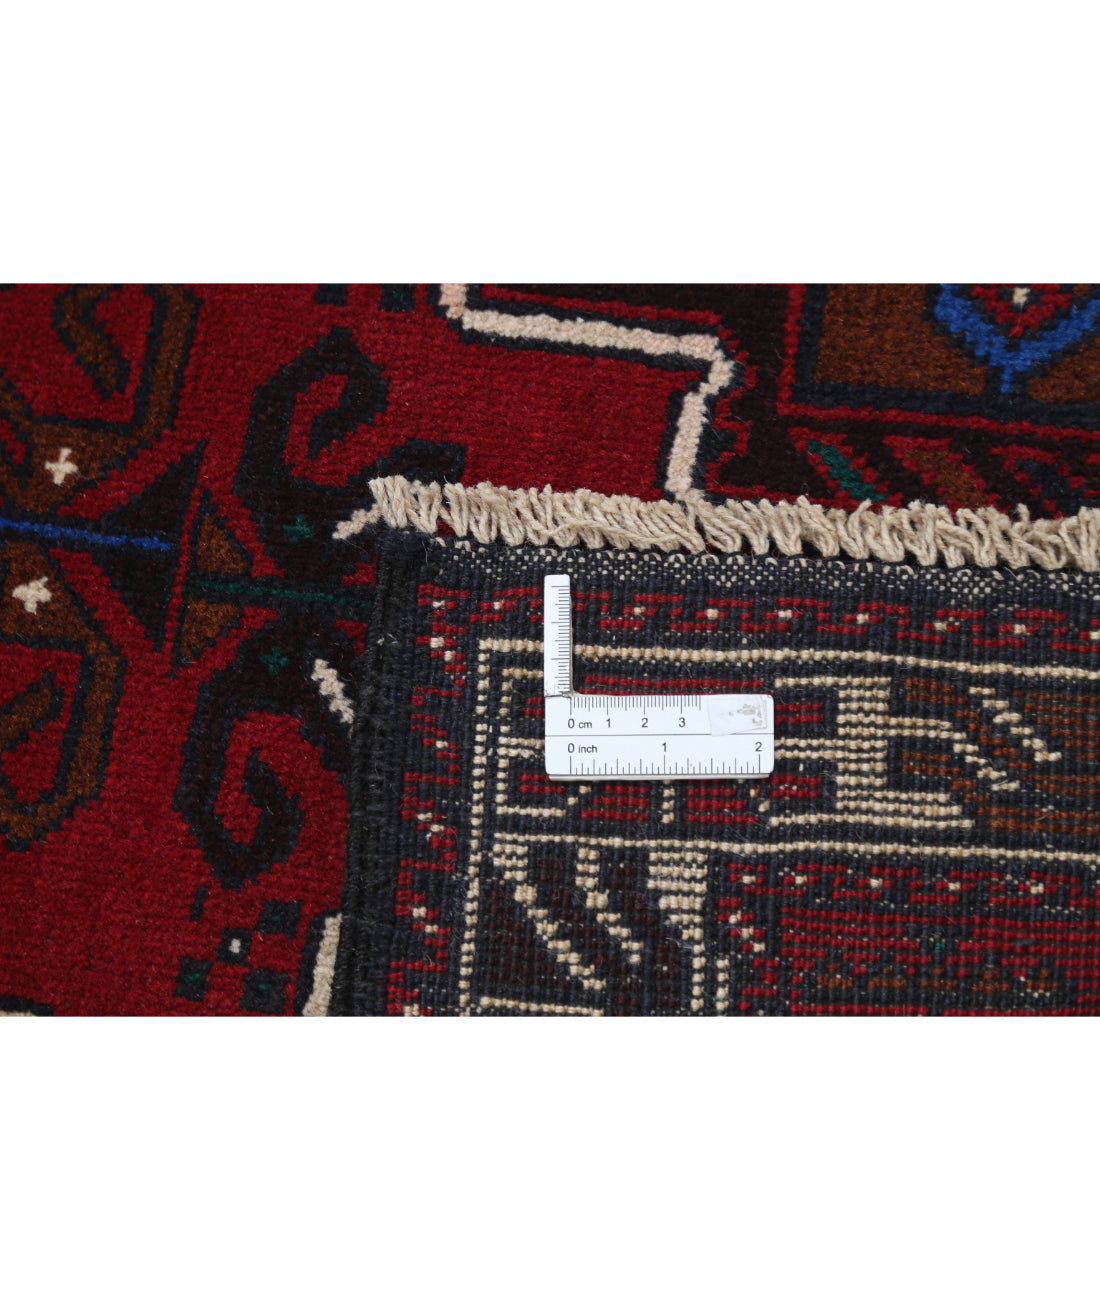 Baluch 2'1'' X 4'8'' Hand-Knotted Wool Rug 2'1'' x 4'8'' (63 X 140) / Red / N/A